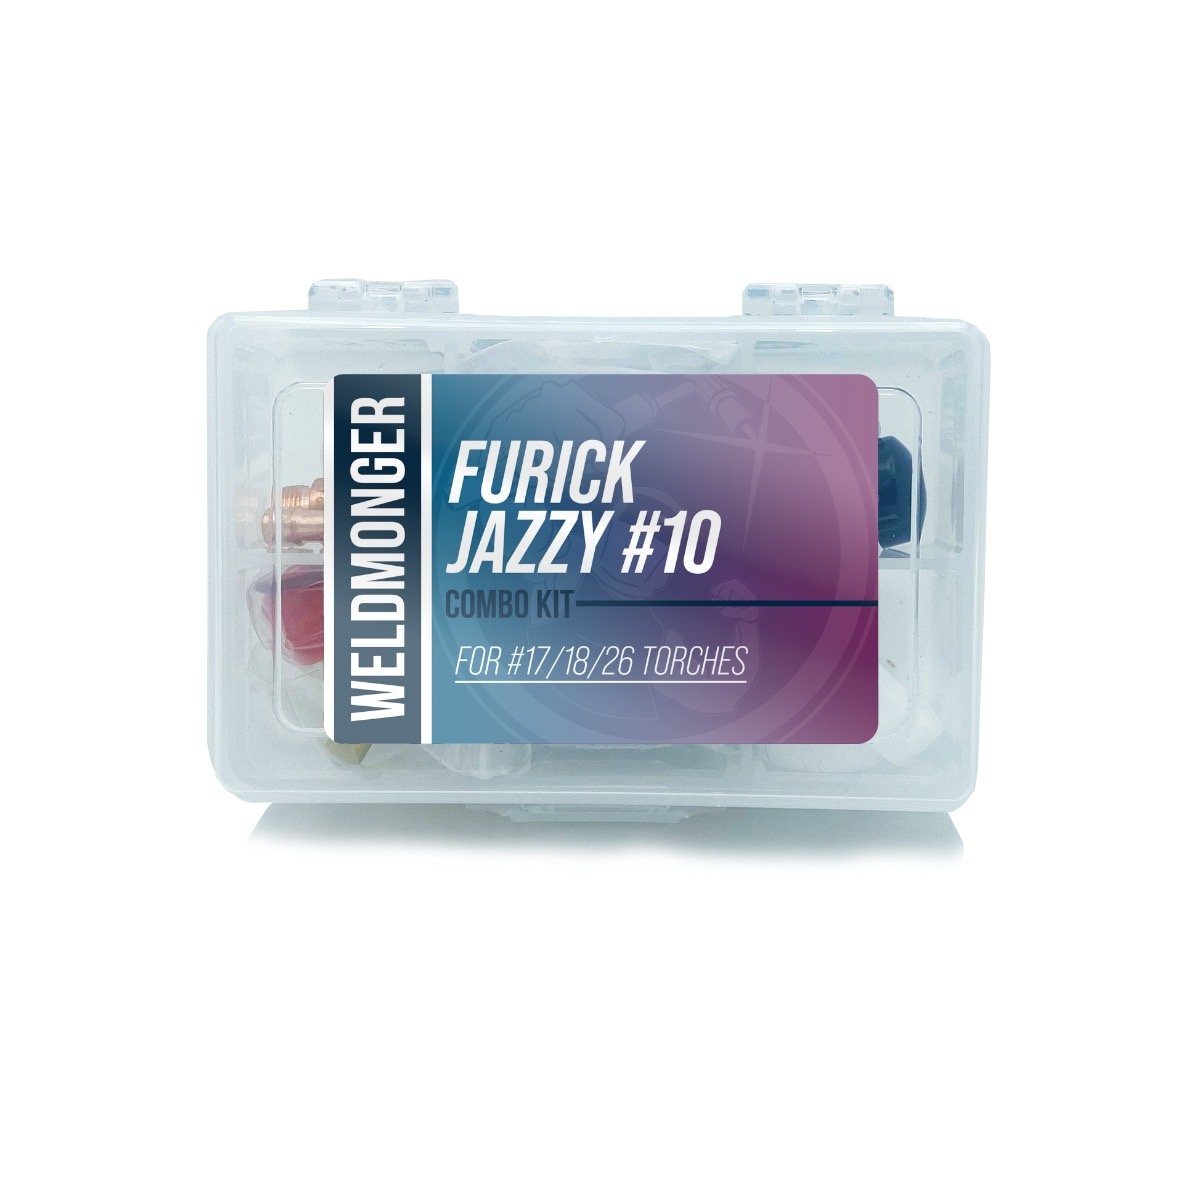 WELDMONGER® Furick Jazzy #10 Combo Kit - For 17/18/26 Style Torches